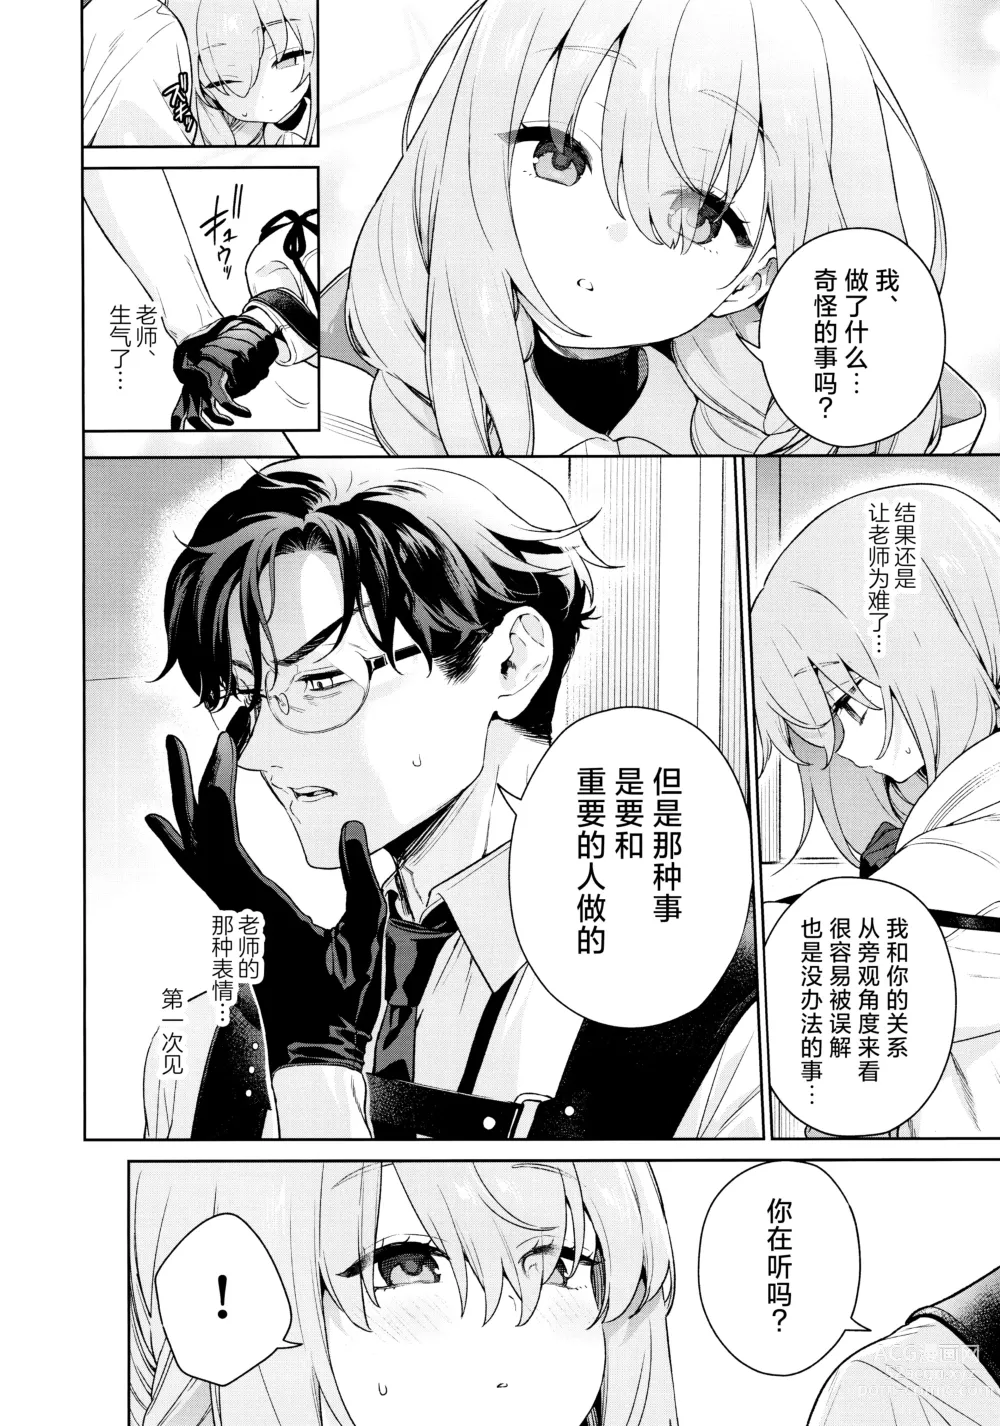 Page 8 of doujinshi 请教(管)教我